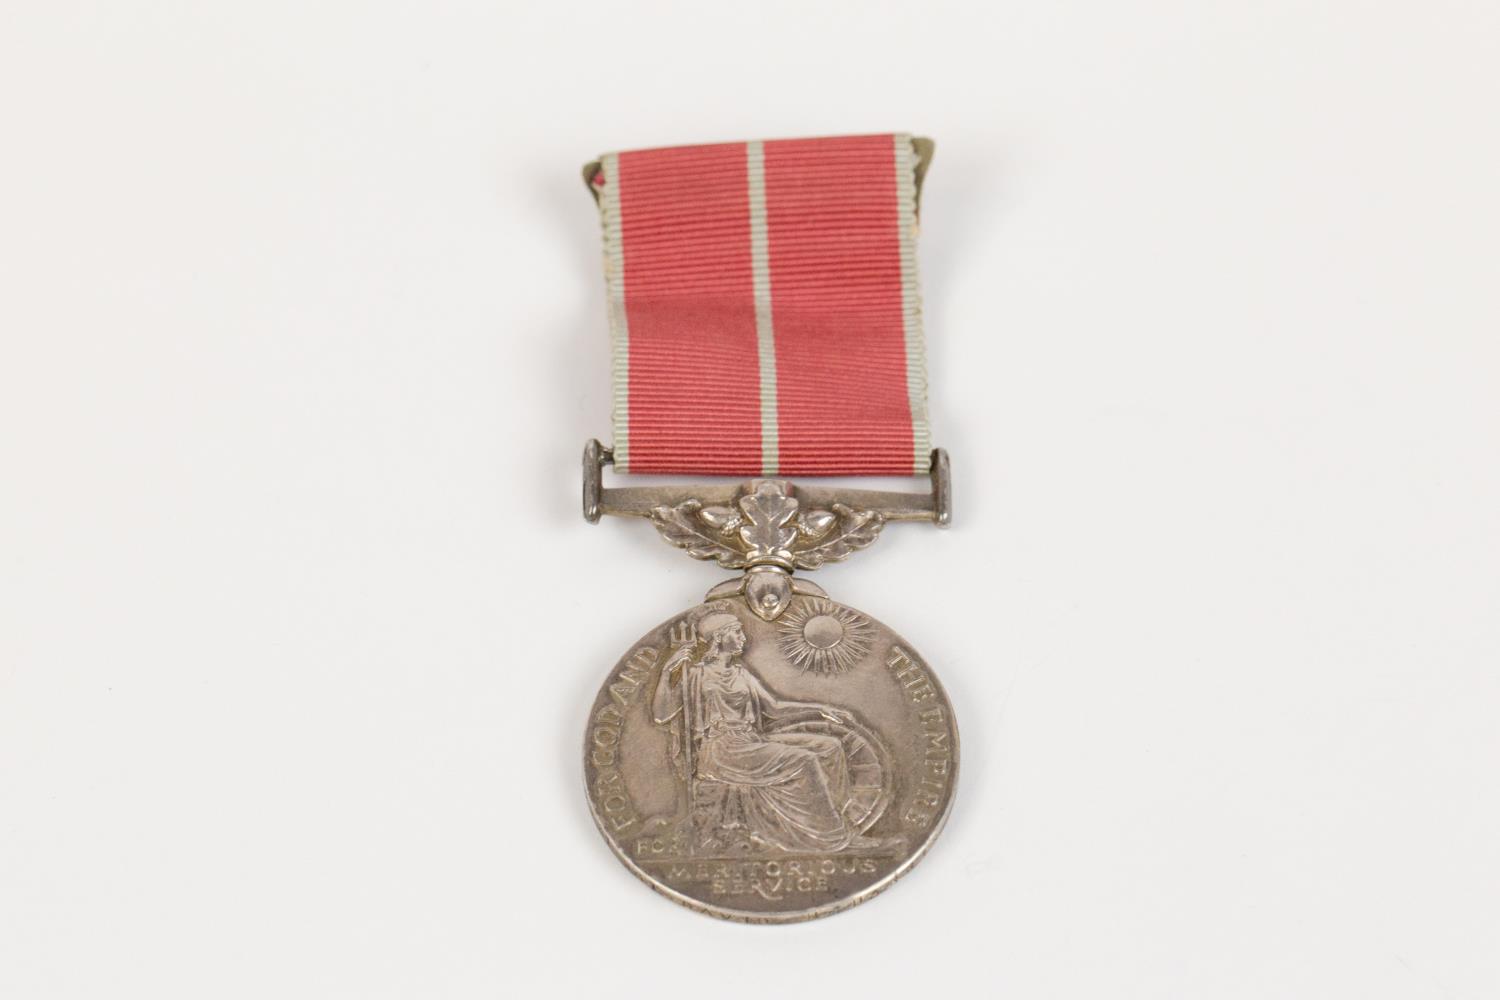 British Empire Medal, George VI military issue, (2196931 Sgt David H Harris RE), VF (correction to